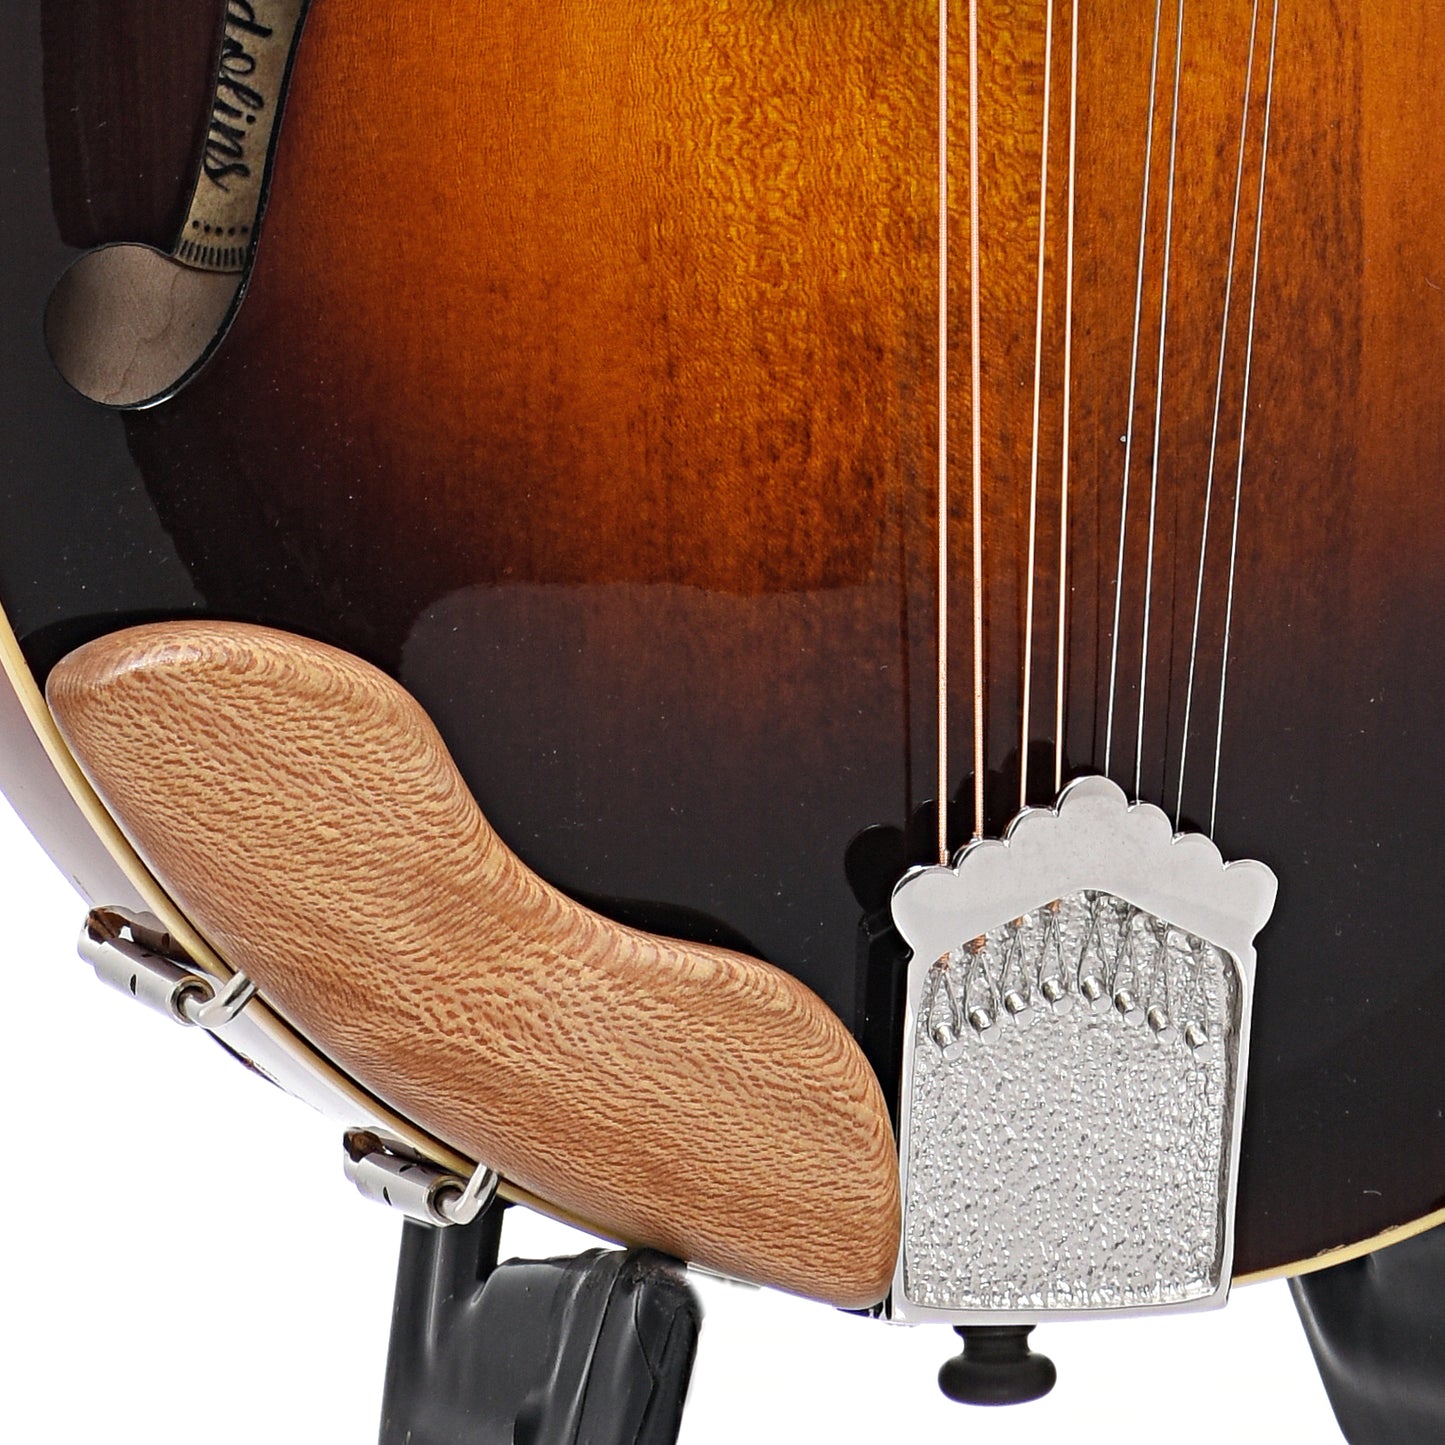 Armrest and tailpiece of Isabel A Model Mandolin (2017)